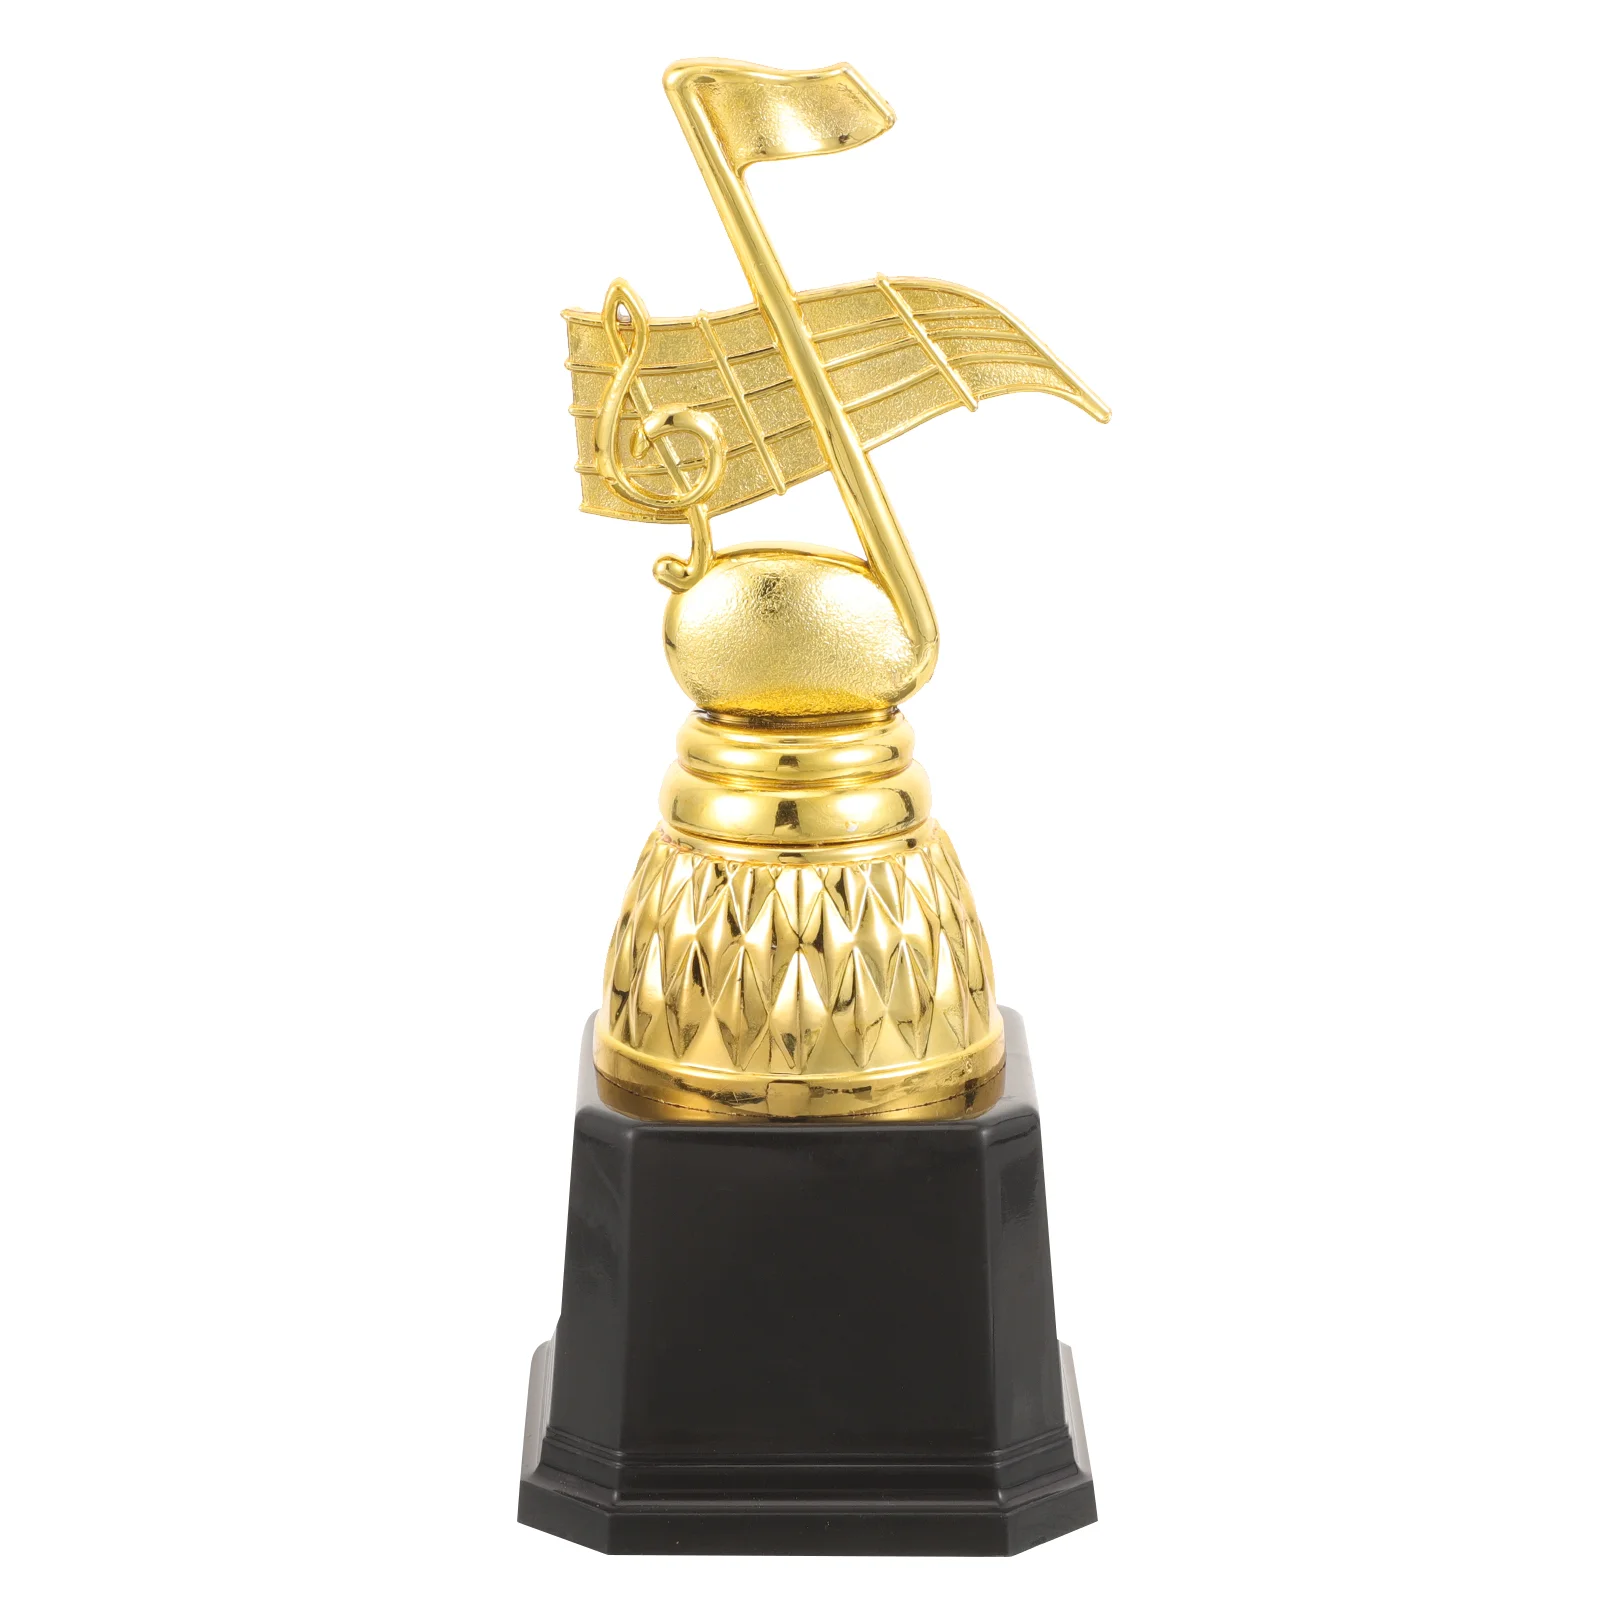 

Singing Competition Trophy Trophies Musical Note Plastic Award Kids School Awards Small Decoration